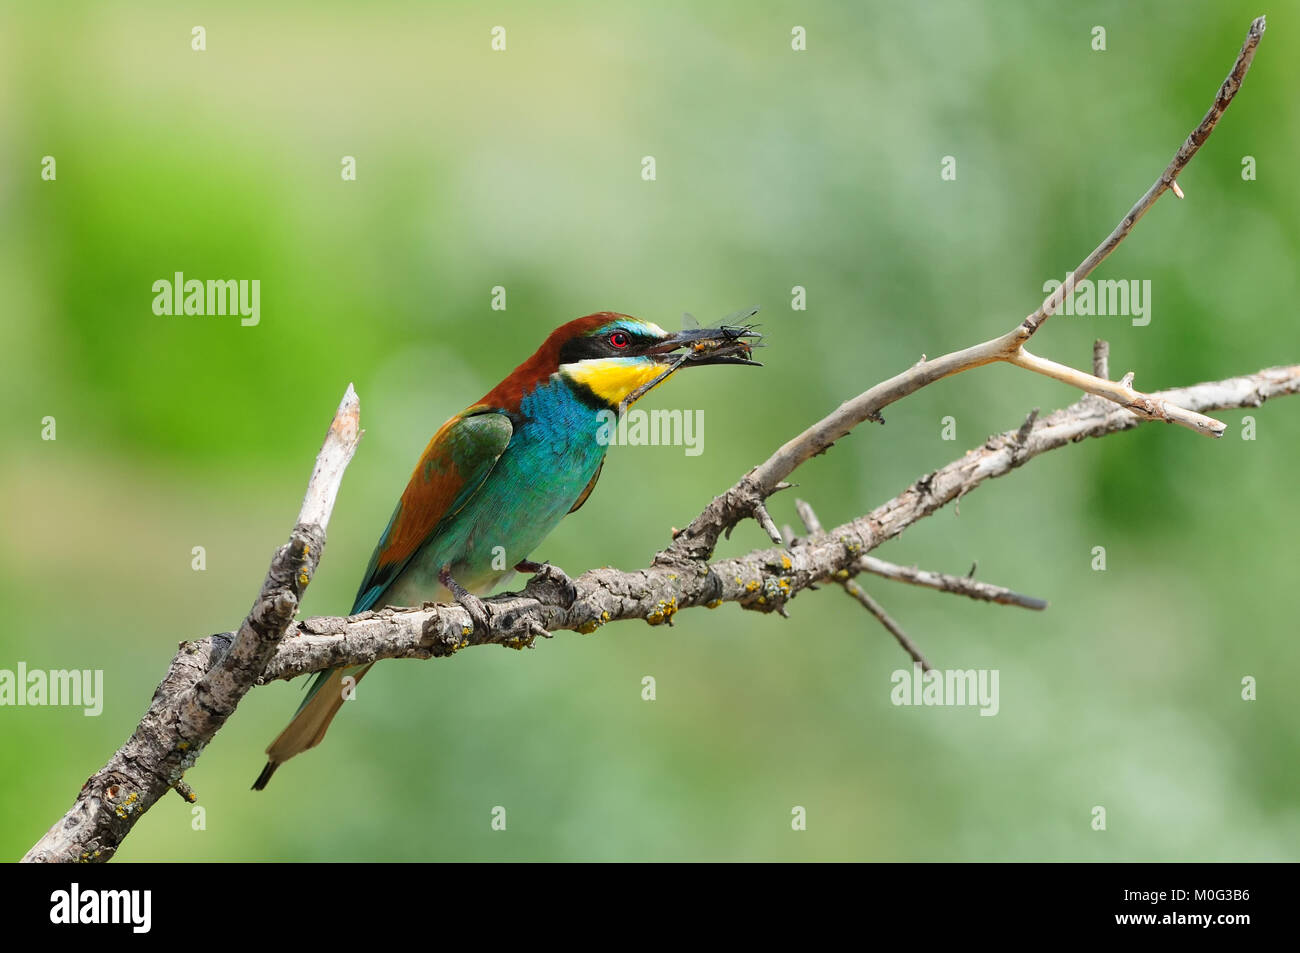 European bee-eater (Merops apiaster) sit on branch with a dragonfly caught. Stock Photo